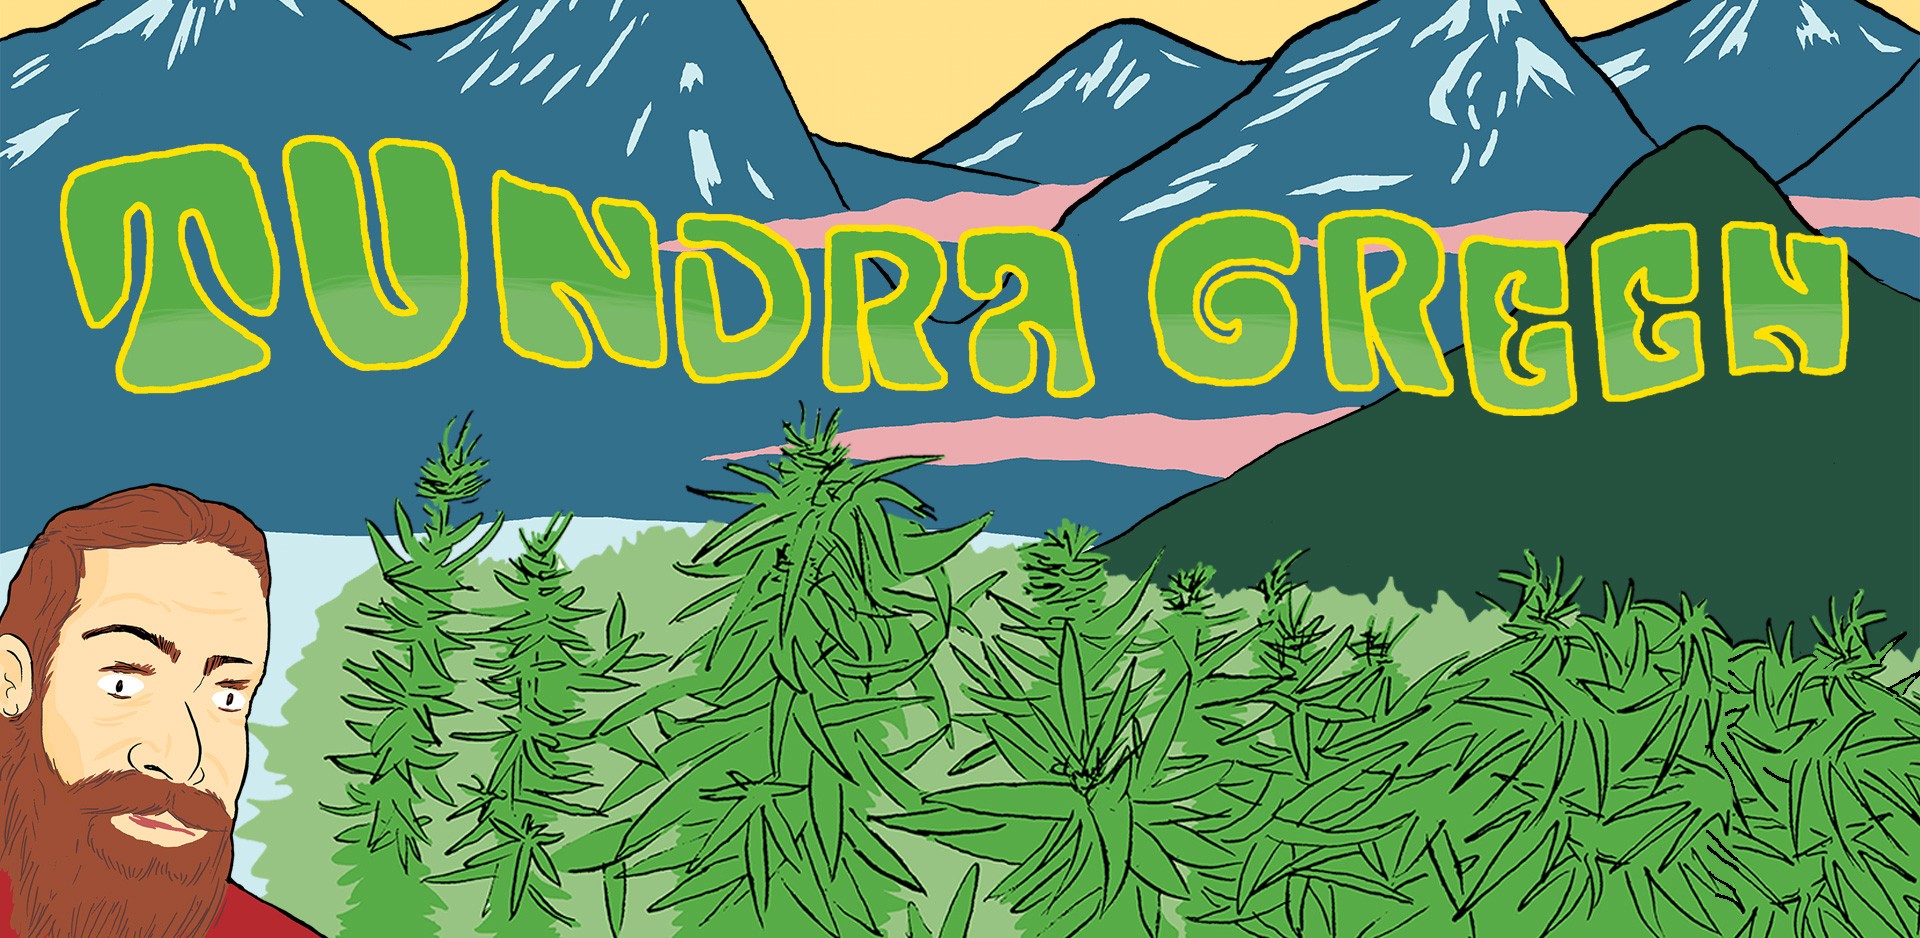 An illustrated image of a field of marijuana, against a backdrop of mountains. A man with a light brown beard is in the left corner. The words "Tundra Green" are suspended in the middle.